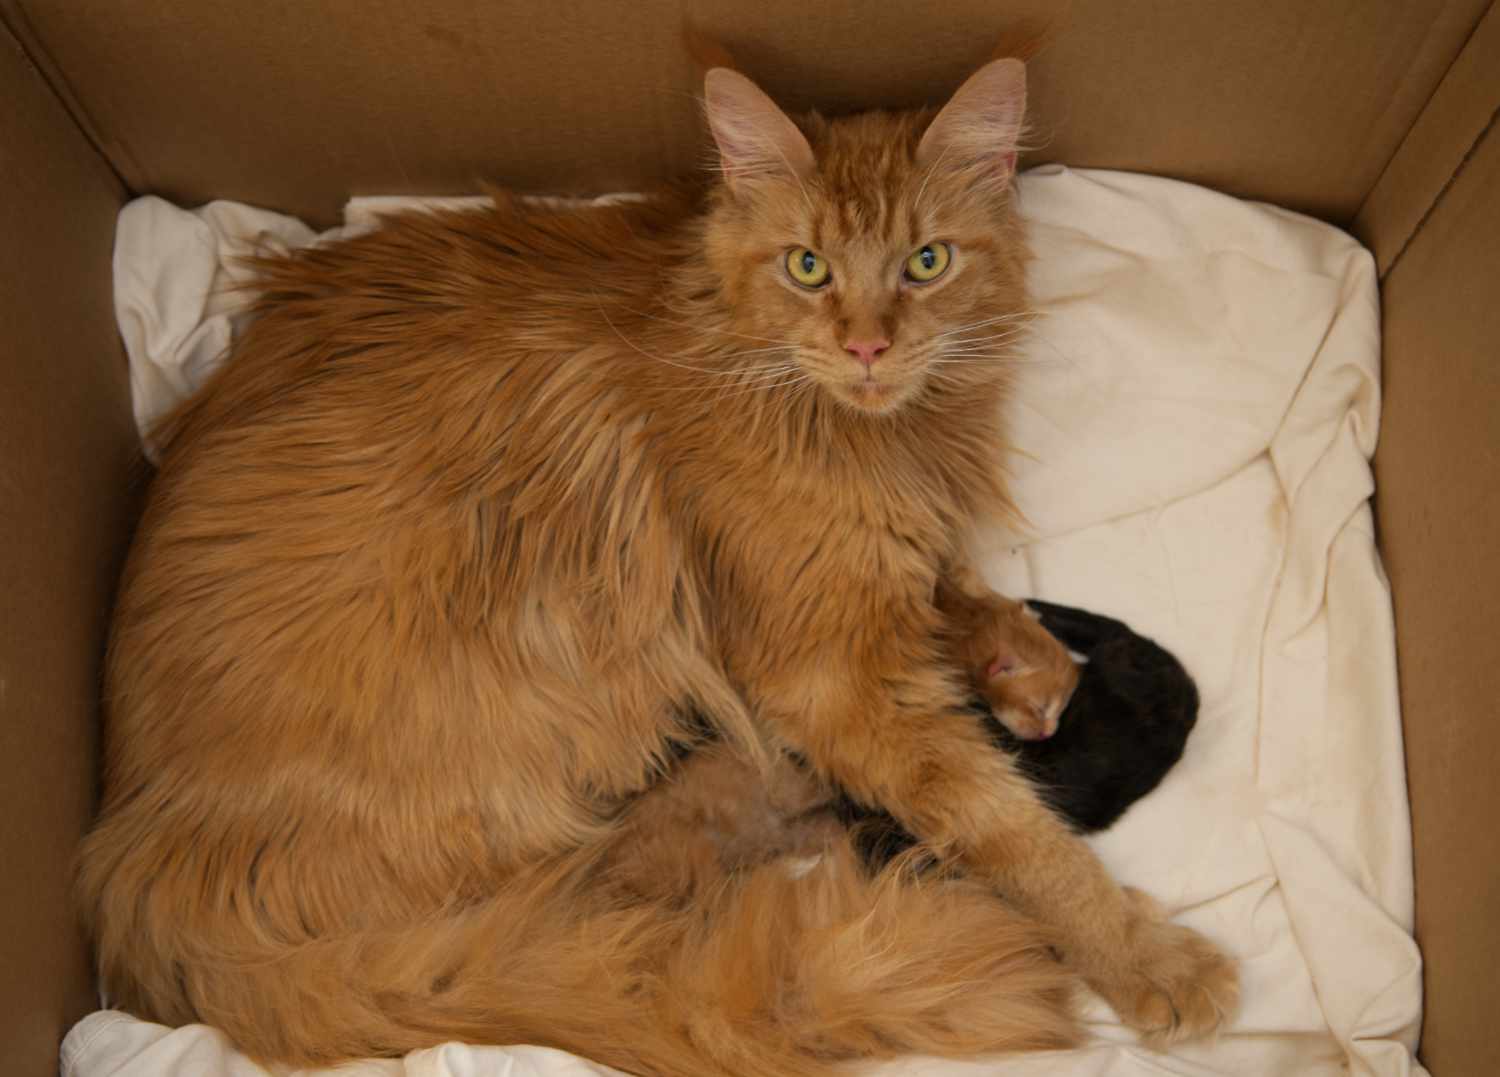 Image: Umay with her kittens